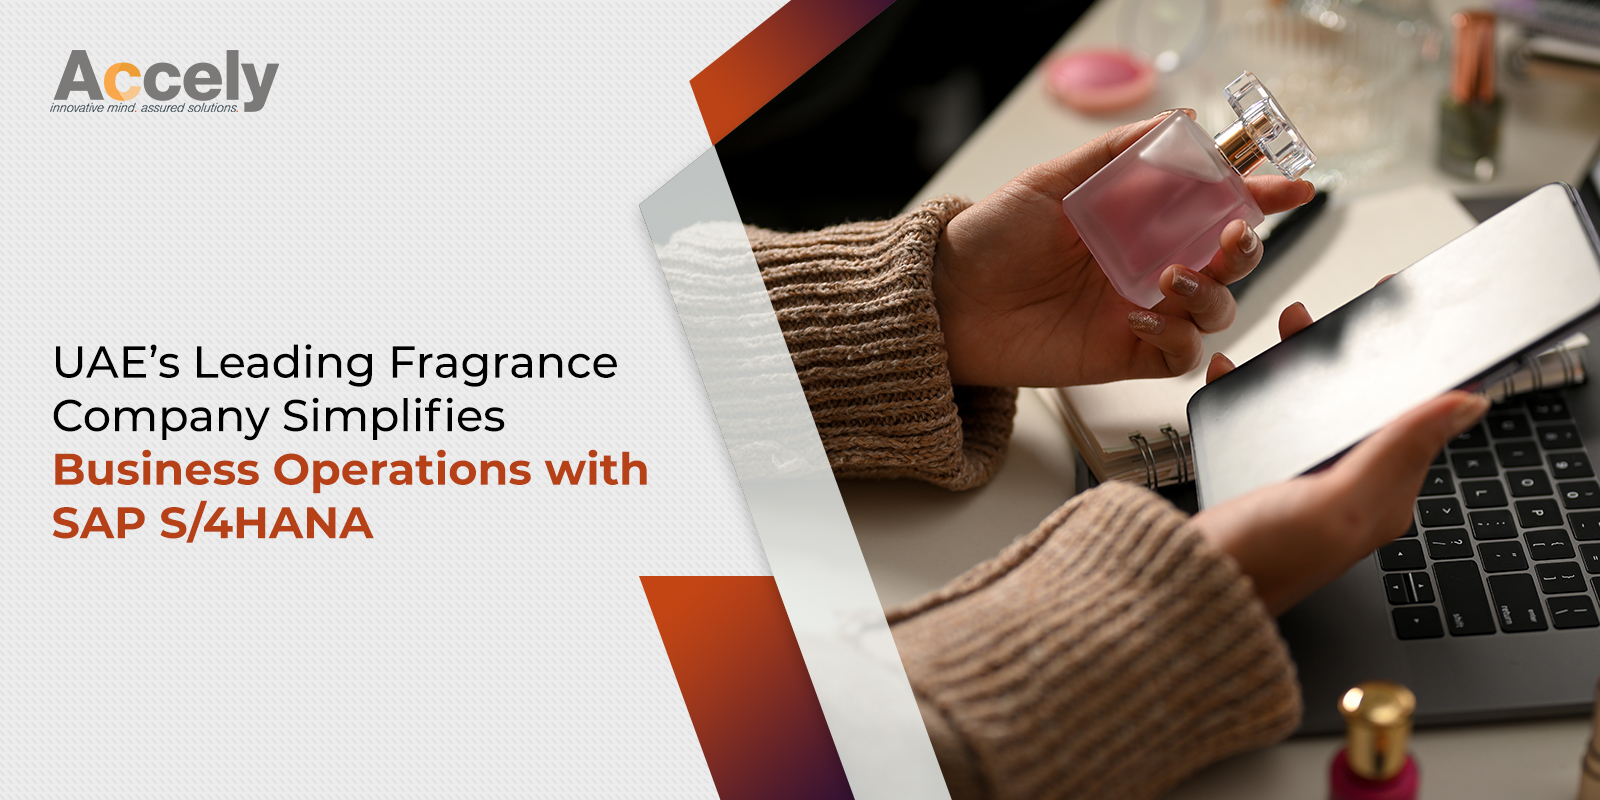 UAE’s Leading Fragrance Company Simplifies Business Operations with SAP S/4HANA